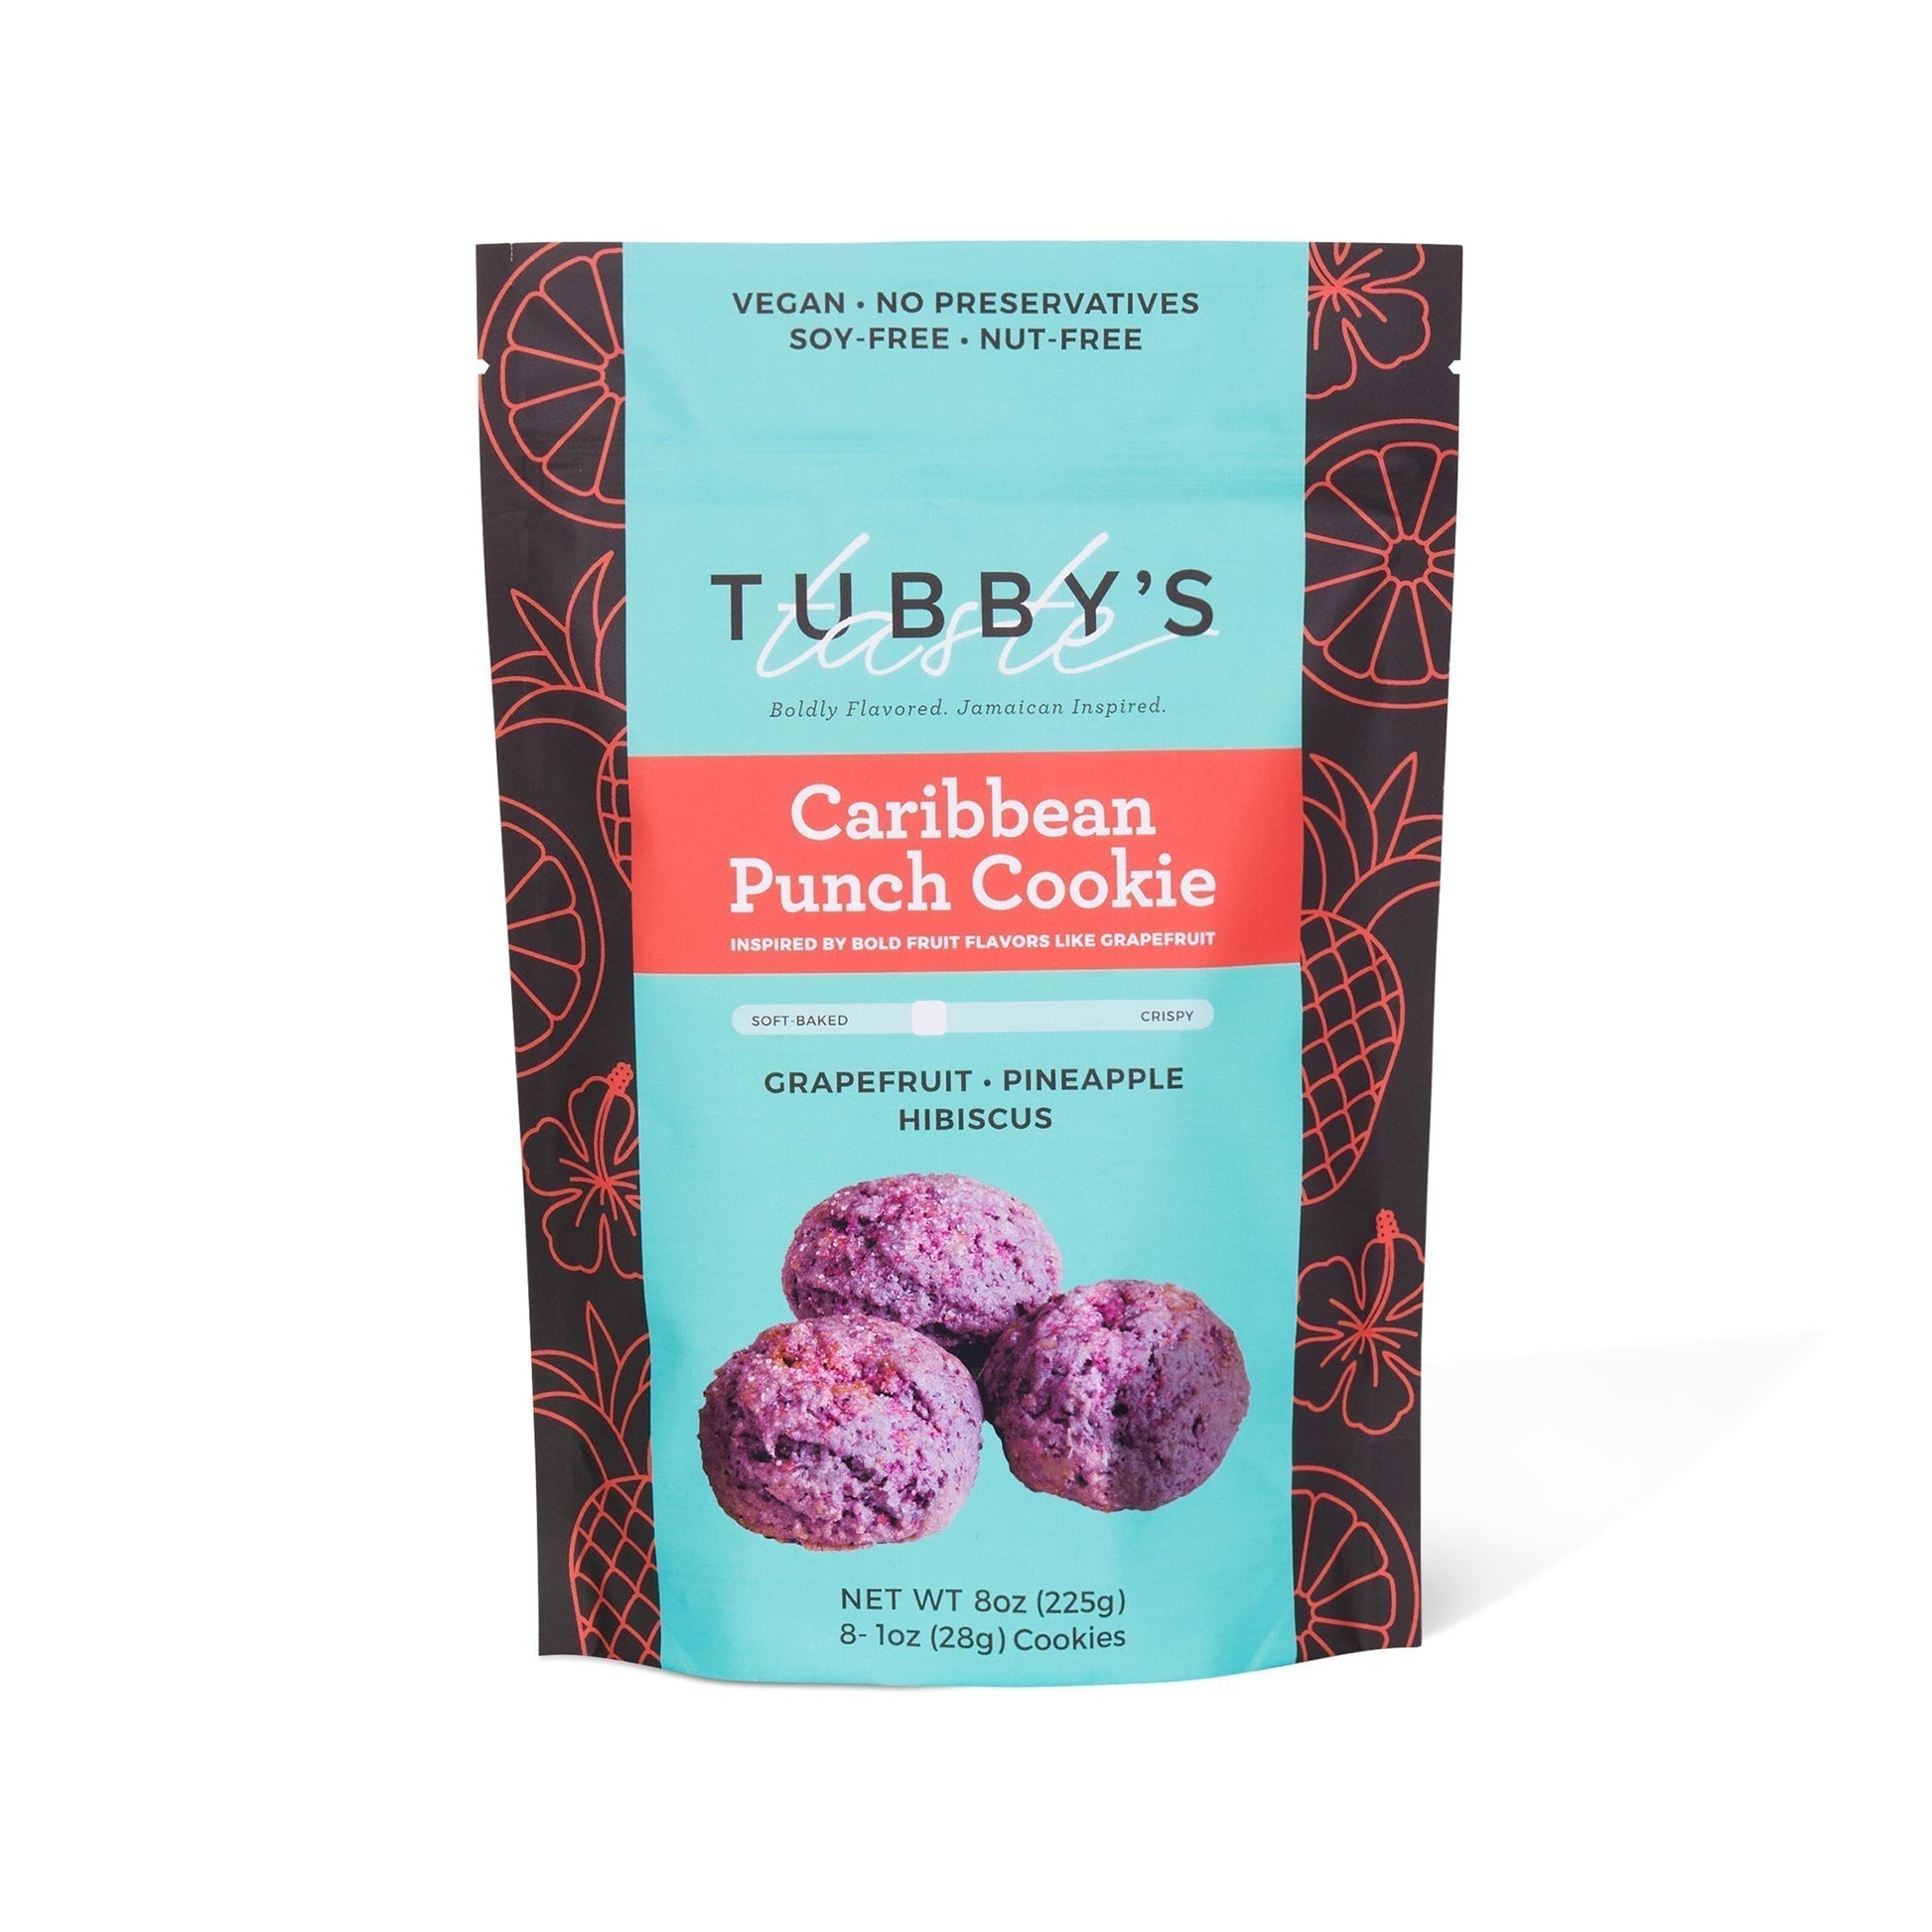 A bag of caribbean punch cookies on a white background.